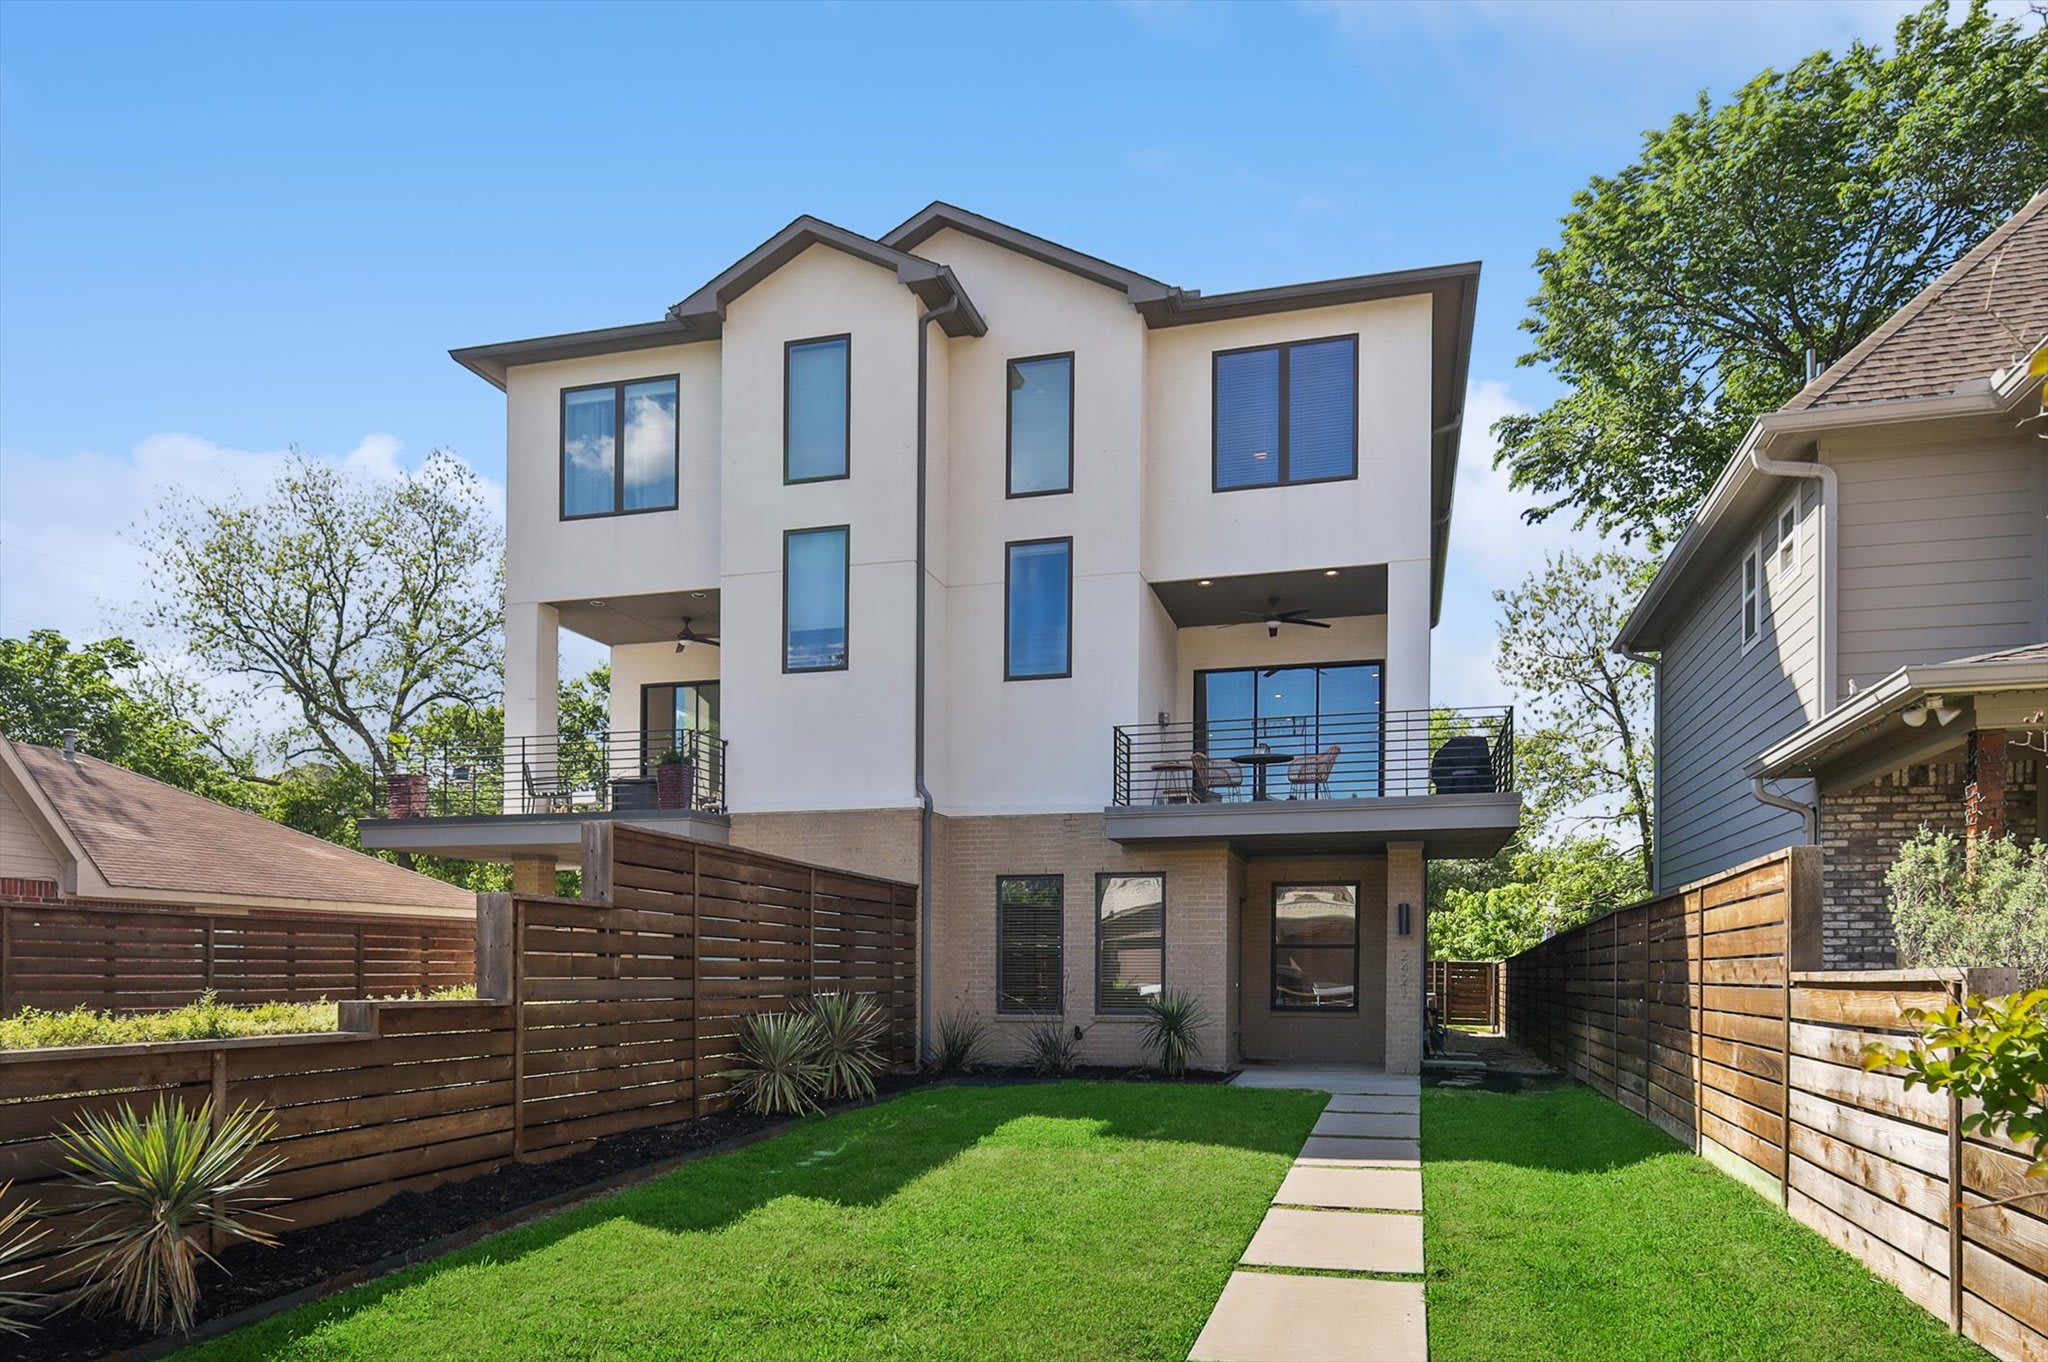 Welcome to your modern oasis in the heart of Dallas! This stunning dream vacation townhouse boasts 3 spacious bedrooms, 3.5 bathrooms, and luxury finishes throughout!